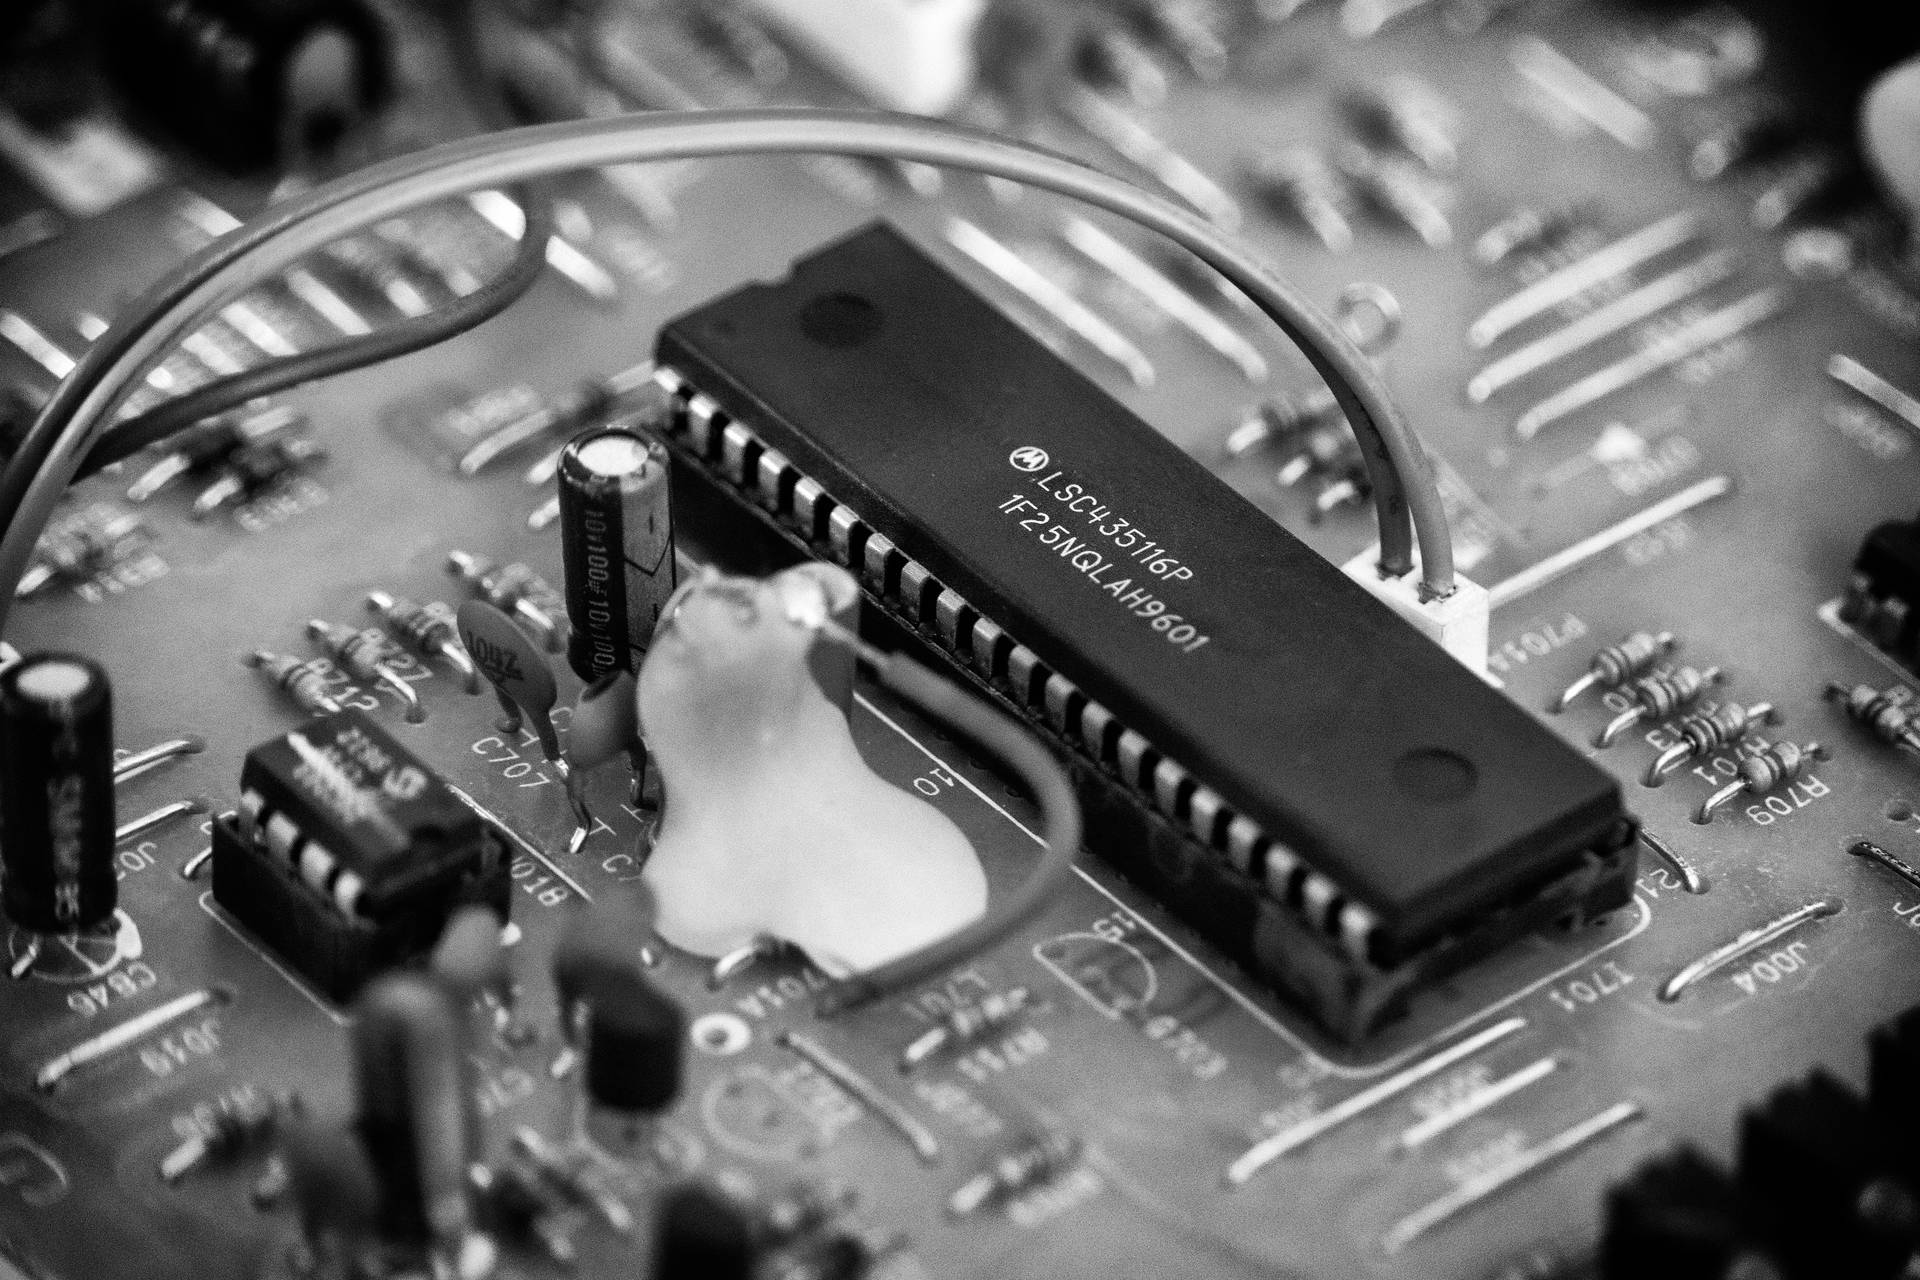 Caption: Advanced Modern Motherboard Close-up View